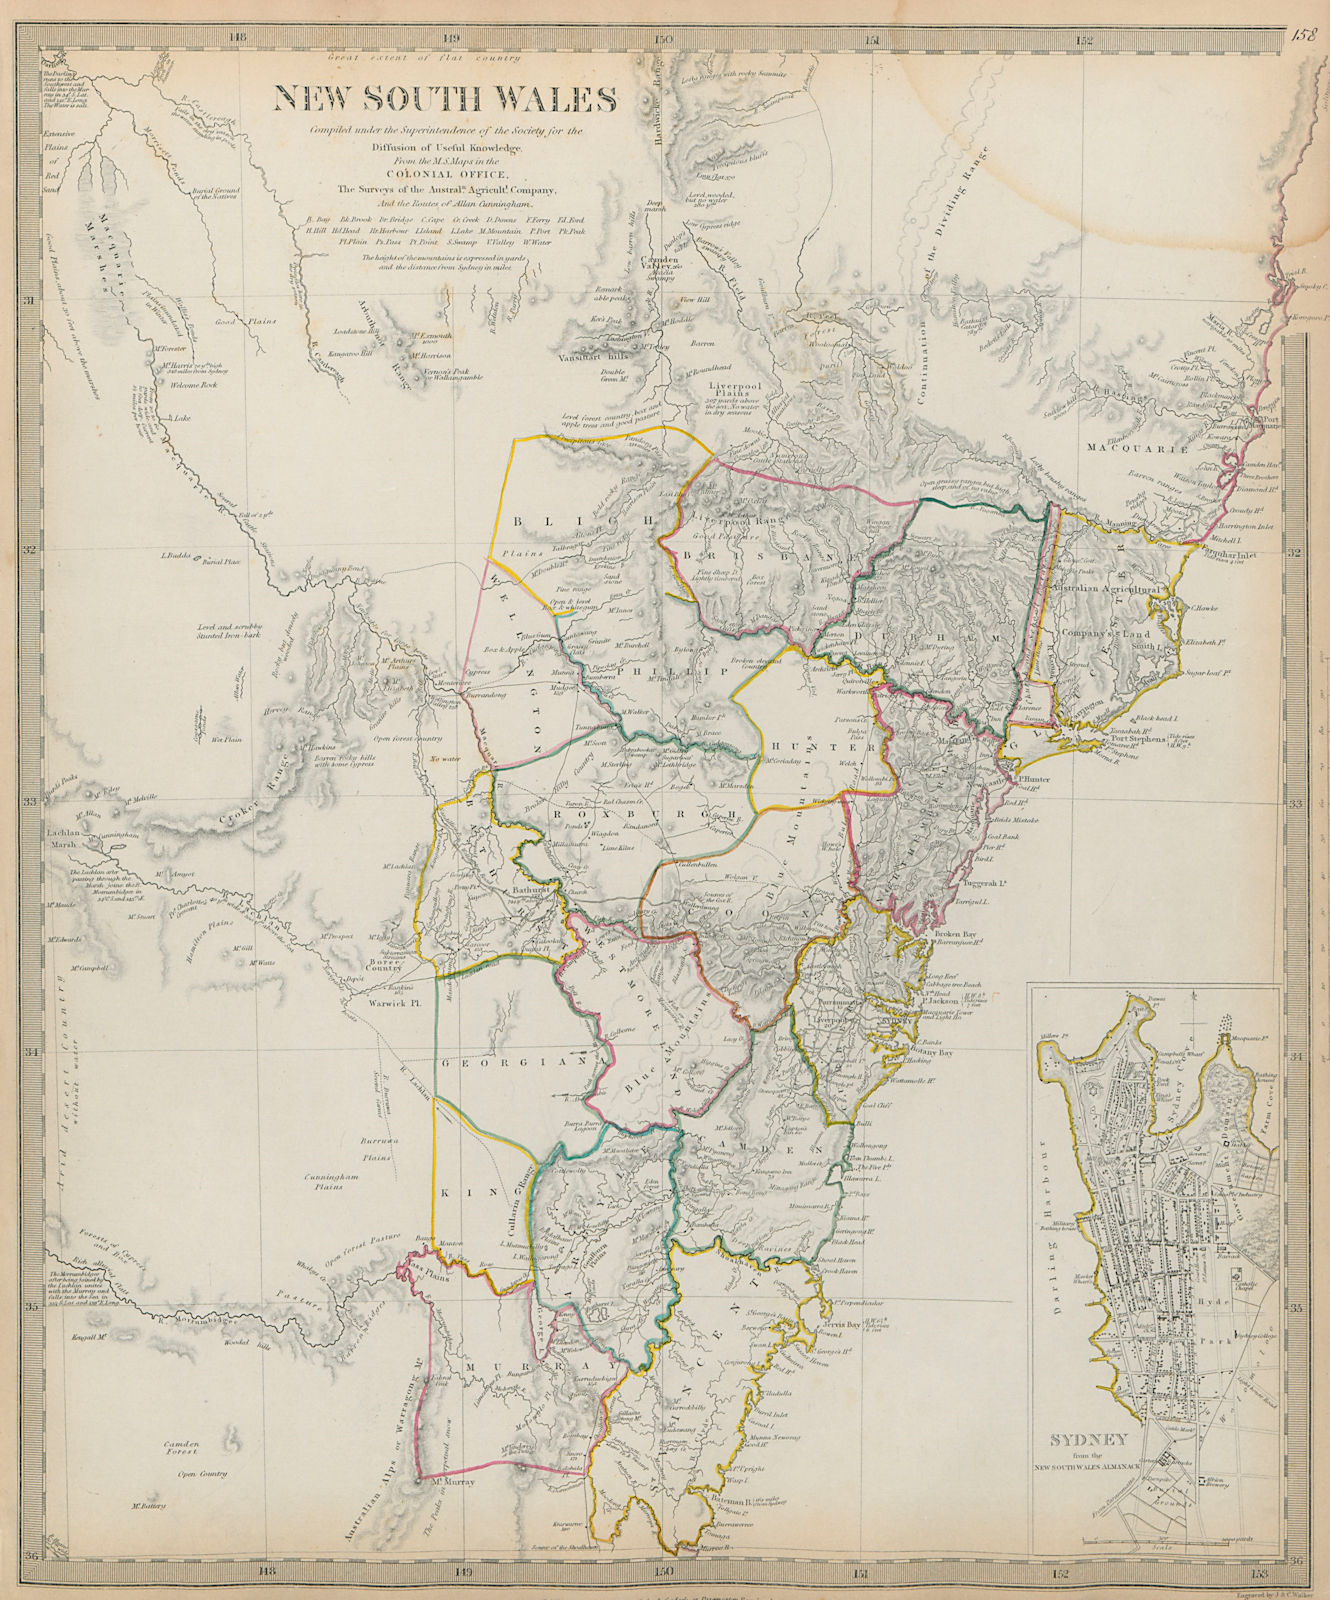 NEW SOUTH WALES & Sydney town city plan. Cunningham routes. SDUK 1844 old map